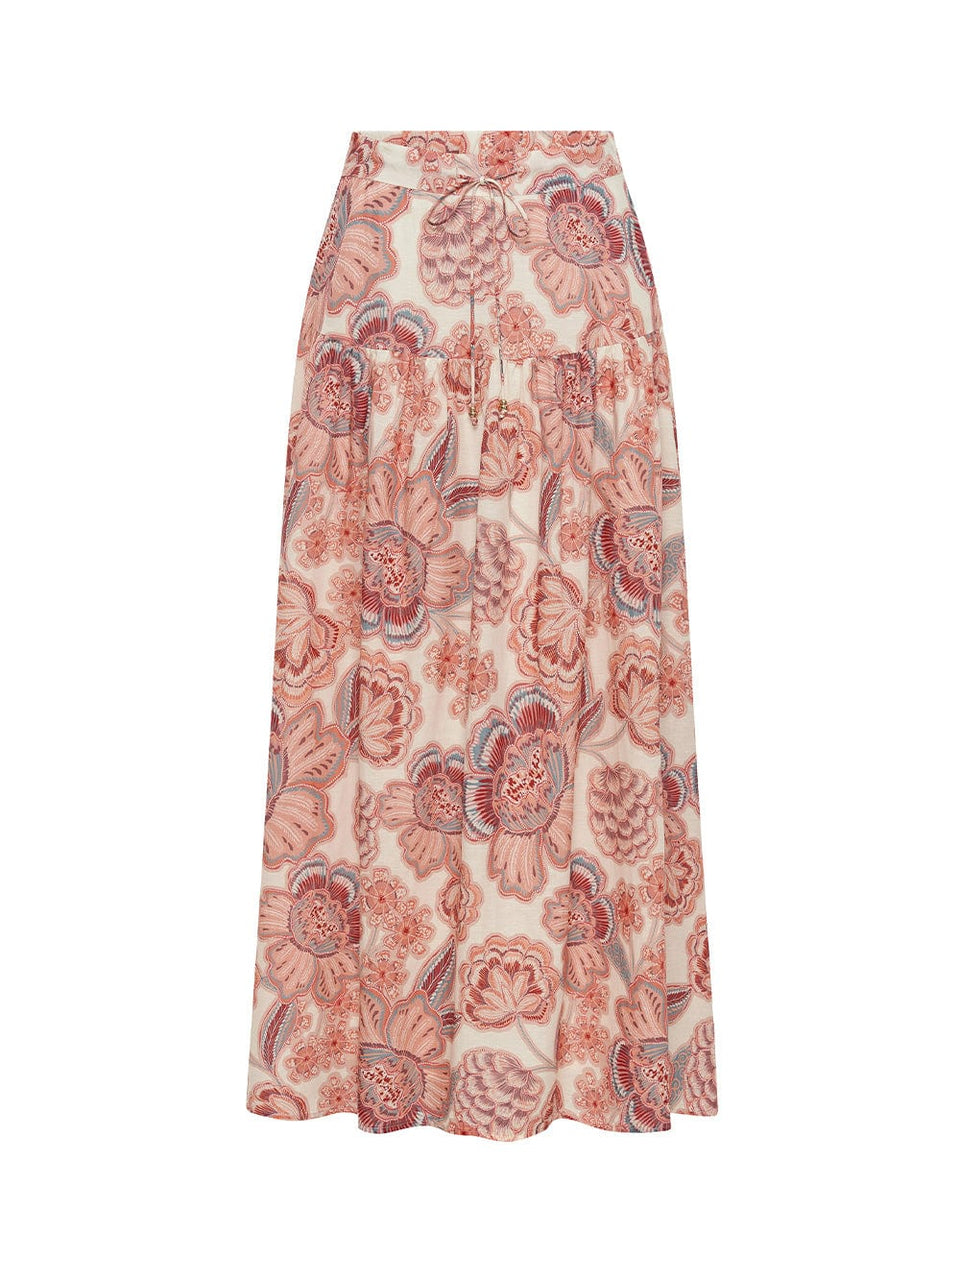 Ghost image of KIVARI Maya Maxi Skirt: A pink and red floral on a natural base featuring a flat waistband front and elasticated back with front tie, side zipper and a gathered tiered skirt.